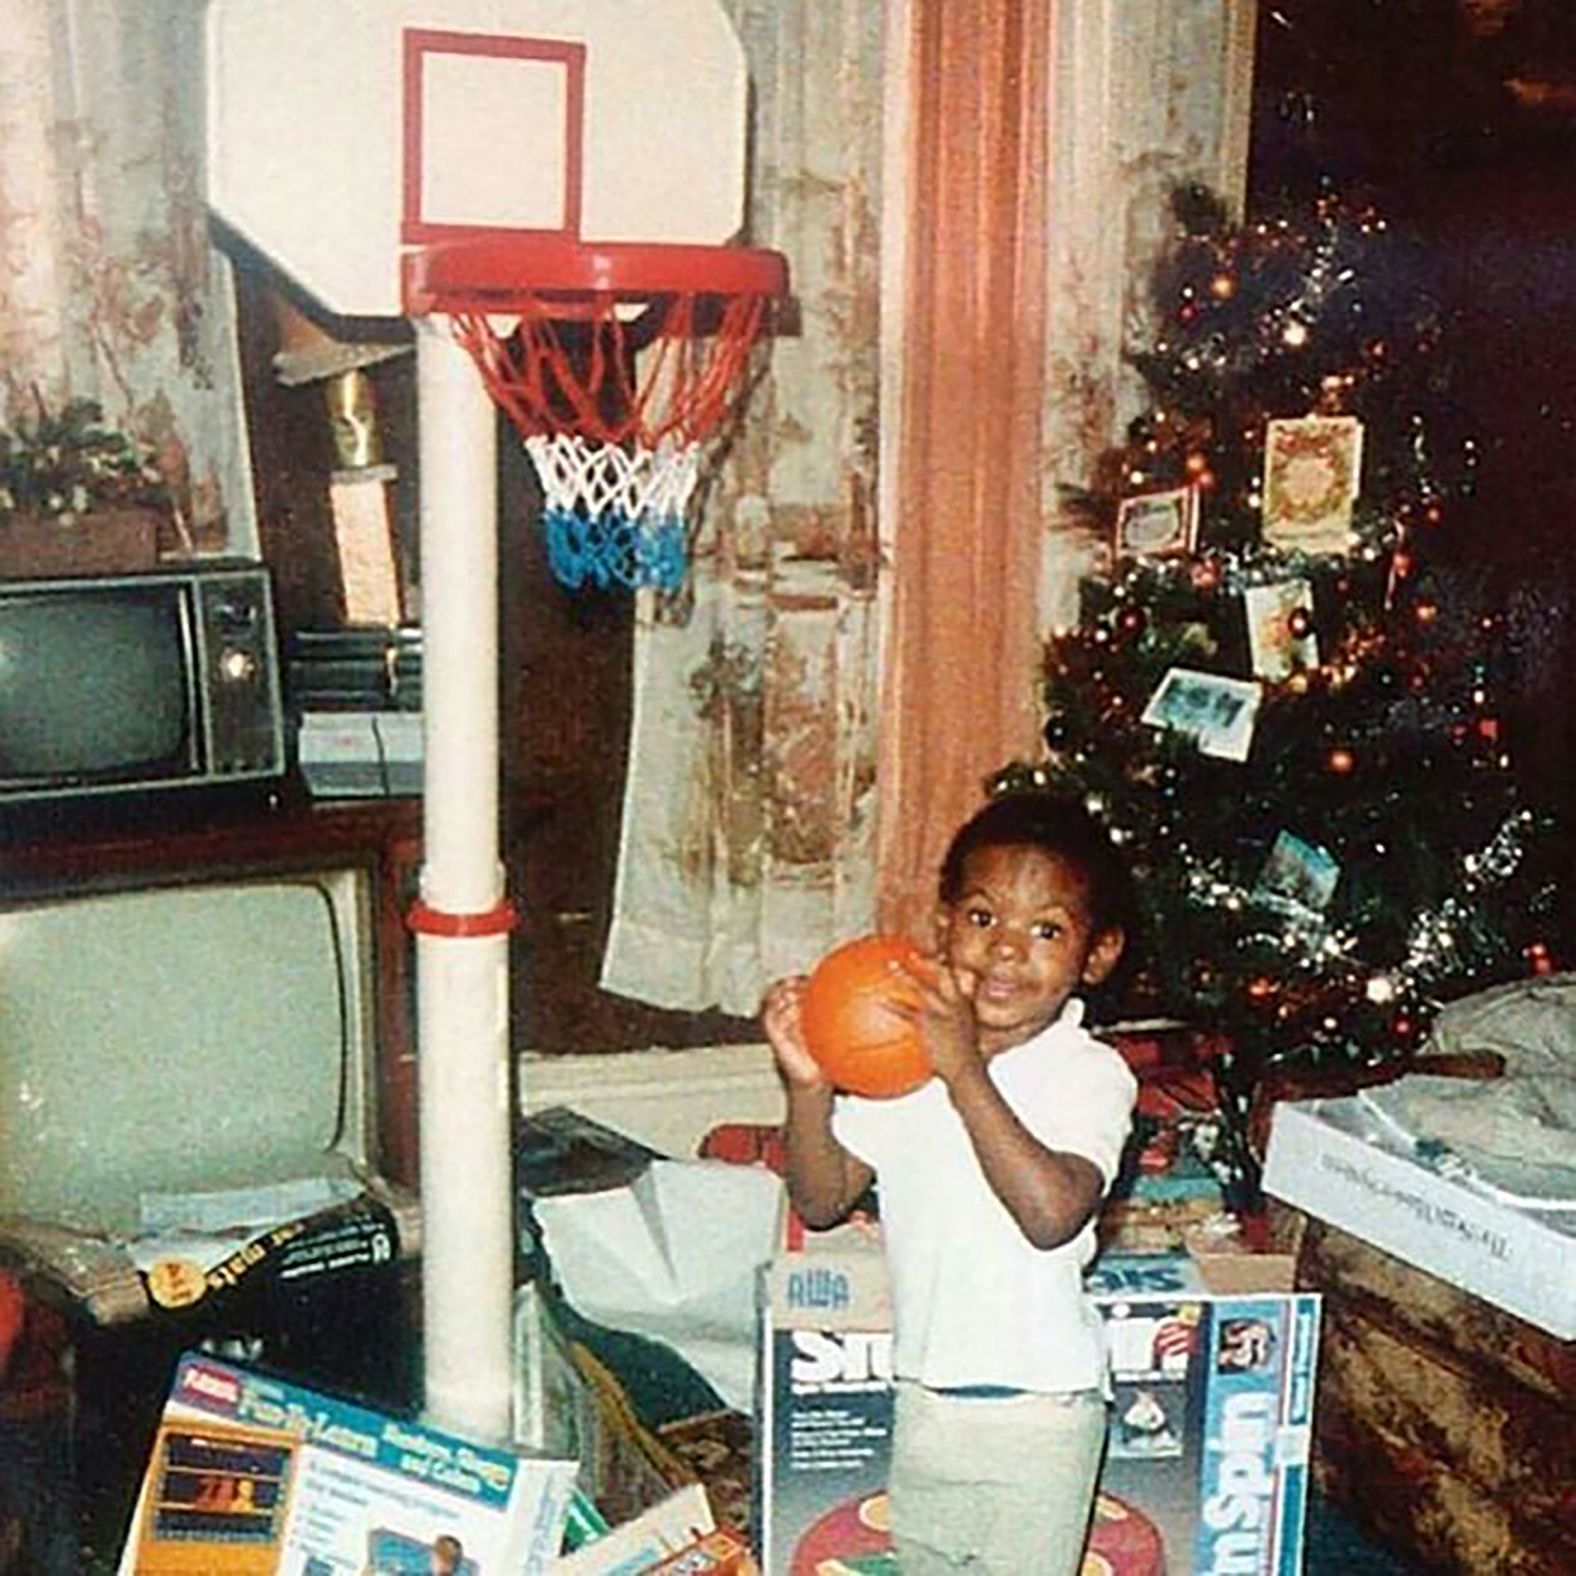 A young James plays on a toy basketball hoop at Christmas time. "I guess I was kinda born to do this," <a href="index.php?page=&url=https%3A%2F%2Fwww.instagram.com%2Fp%2FBOdrACuhUxO%2F" target="_blank" target="_blank">he said on Instagram</a>.